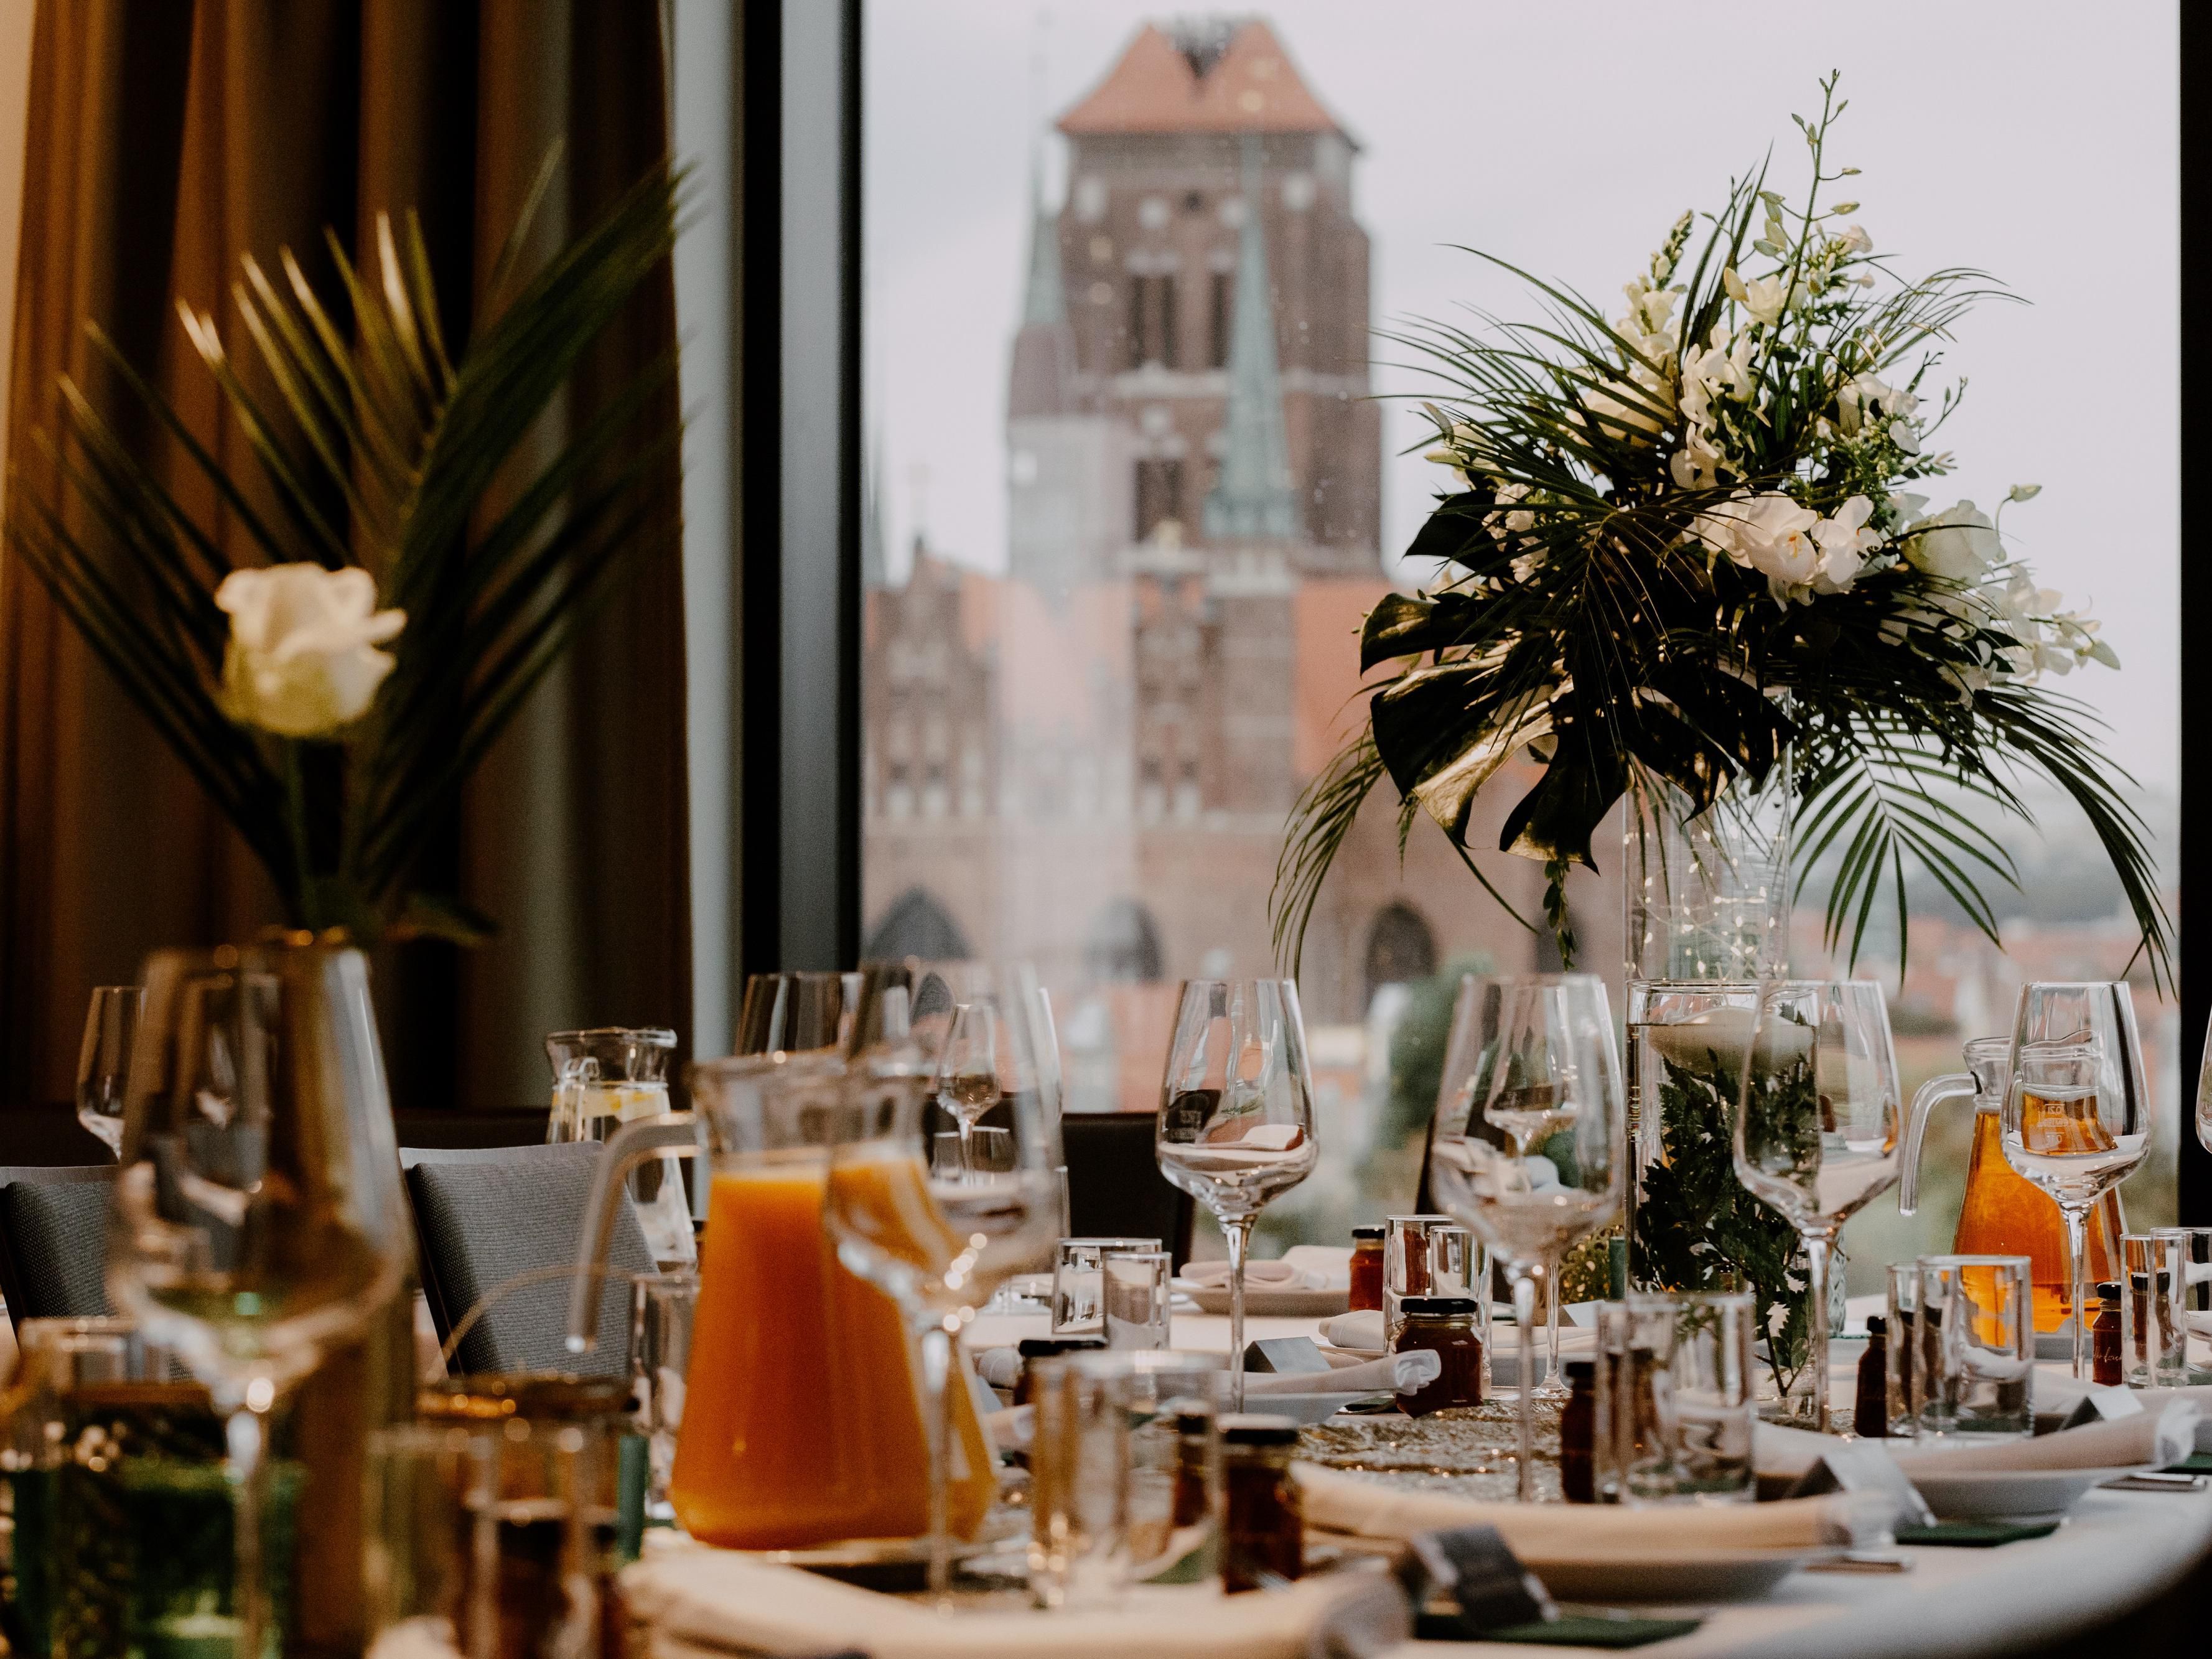 A wedding can be organized in many different places, but only at Holiday Inn Gdańsk – City Centre you can organize a wedding in the clouds. Our hotel has been designed to meet the most sophisticated expectations. Organize a wedding on the 7th floor with the best view in the city.